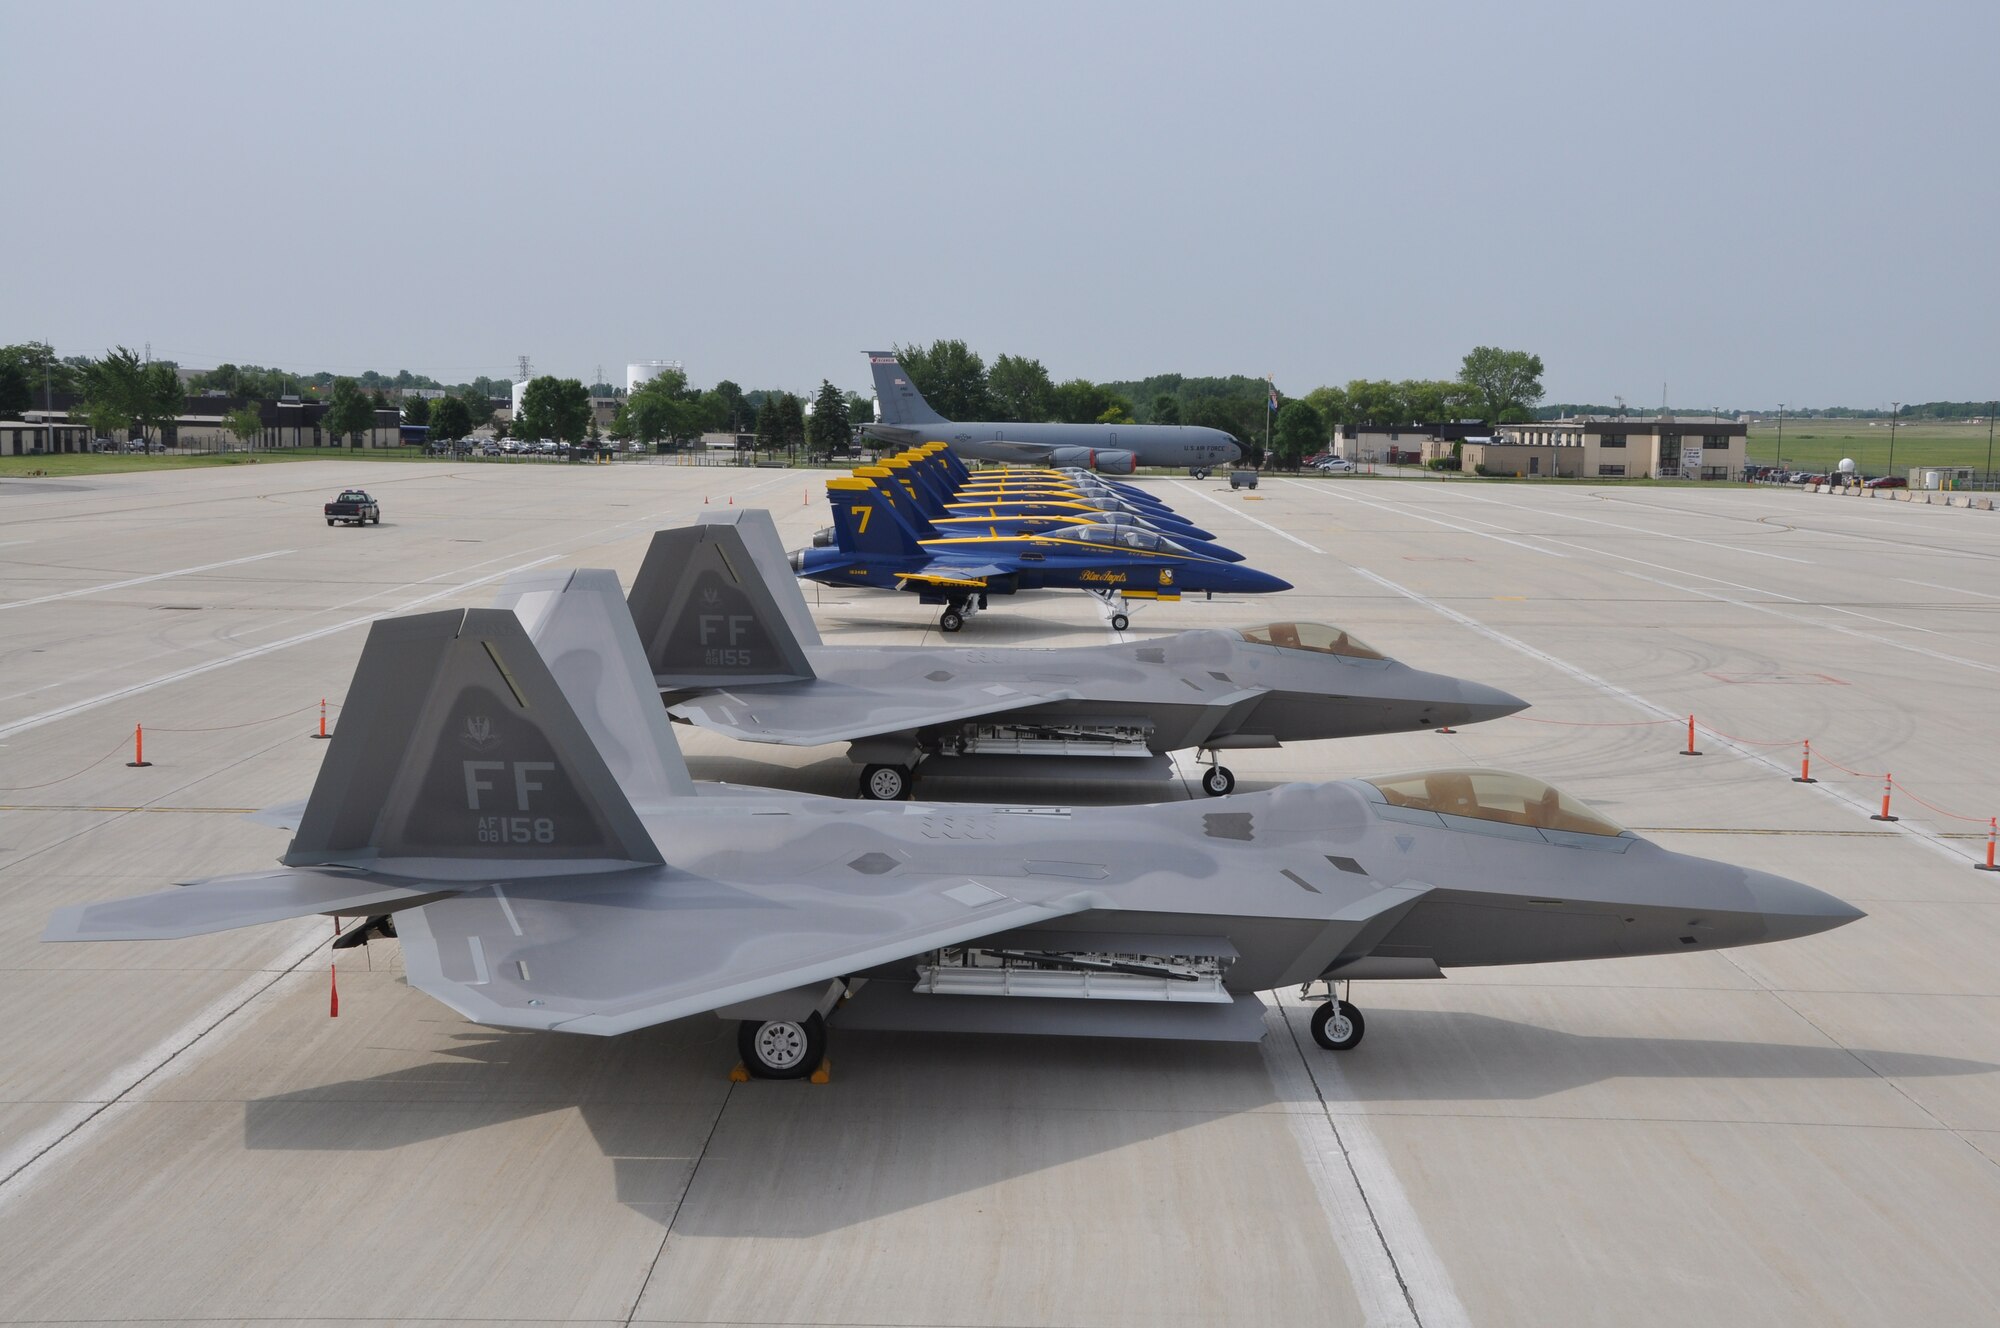 The Air Force F-22 Raptor Aerial Demonstration Team, Navy Blue Angels and an Air Force KC-135G Stratotanker sit on the ramp of the 128th Air Refueling Wing, Gen. Mitchell International Airport, Milwaukee, on Friday, June 11, 2010.  The aircraft participated in the 2010 Milwaukee Air and Water Show, showcasing the capabilities and superiority of U.S. military air assets by performing demonstrations near the Milwaukee shoreline.  The F-22 Raptors are stationed at Langley Air Force Base, VA; the Blue Angels are stationed at Pensacola Naval Air Station, FL; and the KC-135G Stratotanker is stationed at the 128th Air Refueling Wing.  (U.S. Air Force photo by Staff Sgt. Jeremy Wilson / Released)